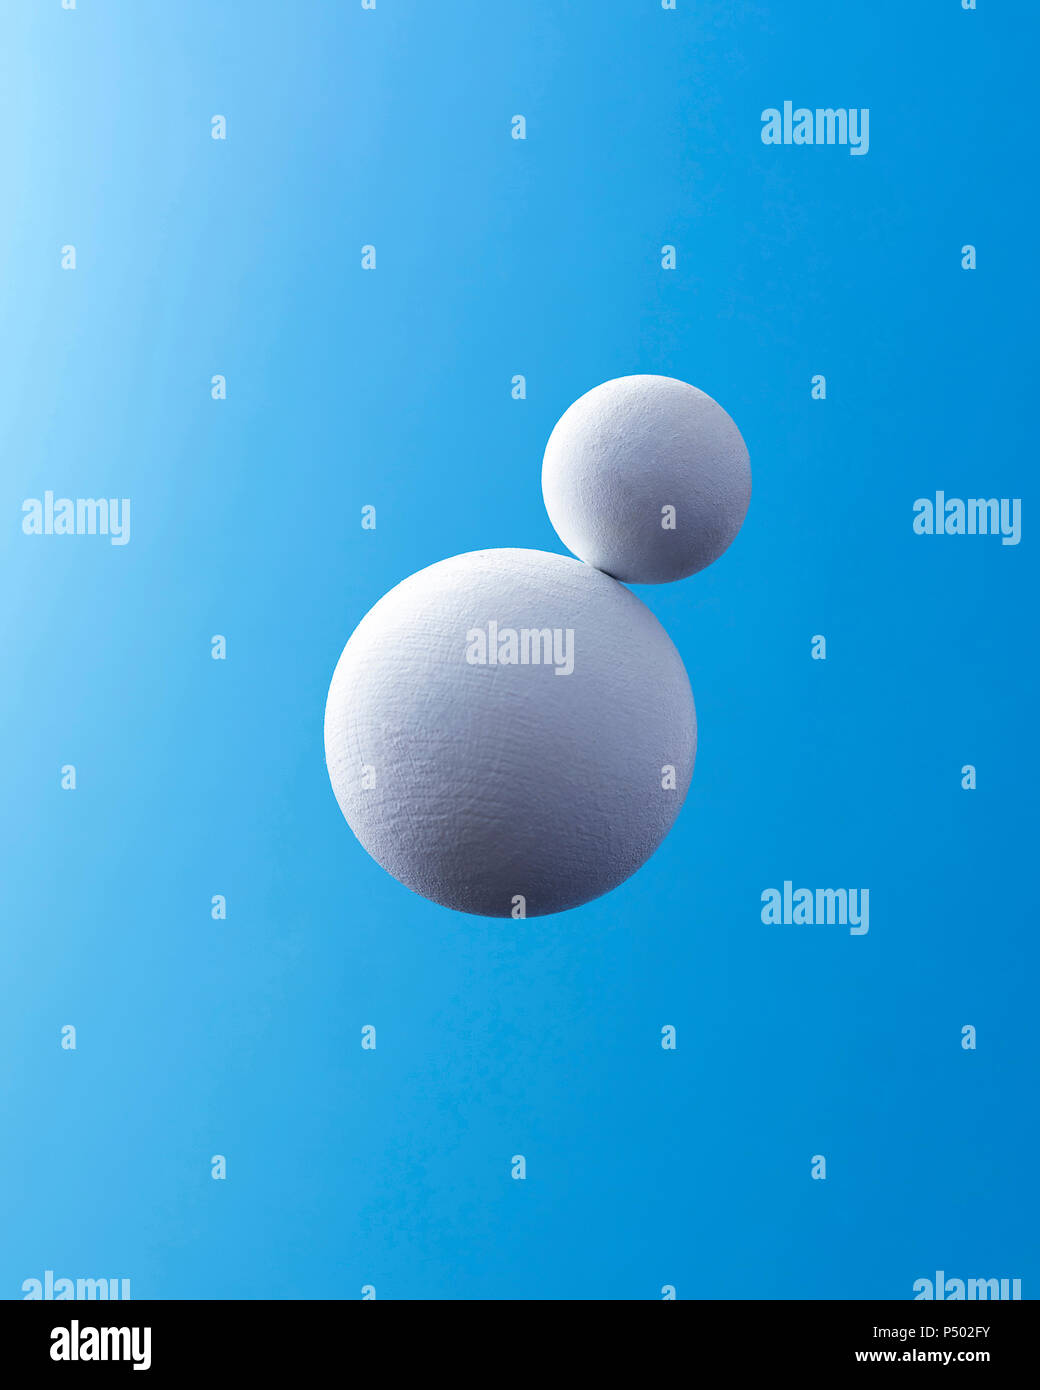 Two white spheres in front of blue background Stock Photo